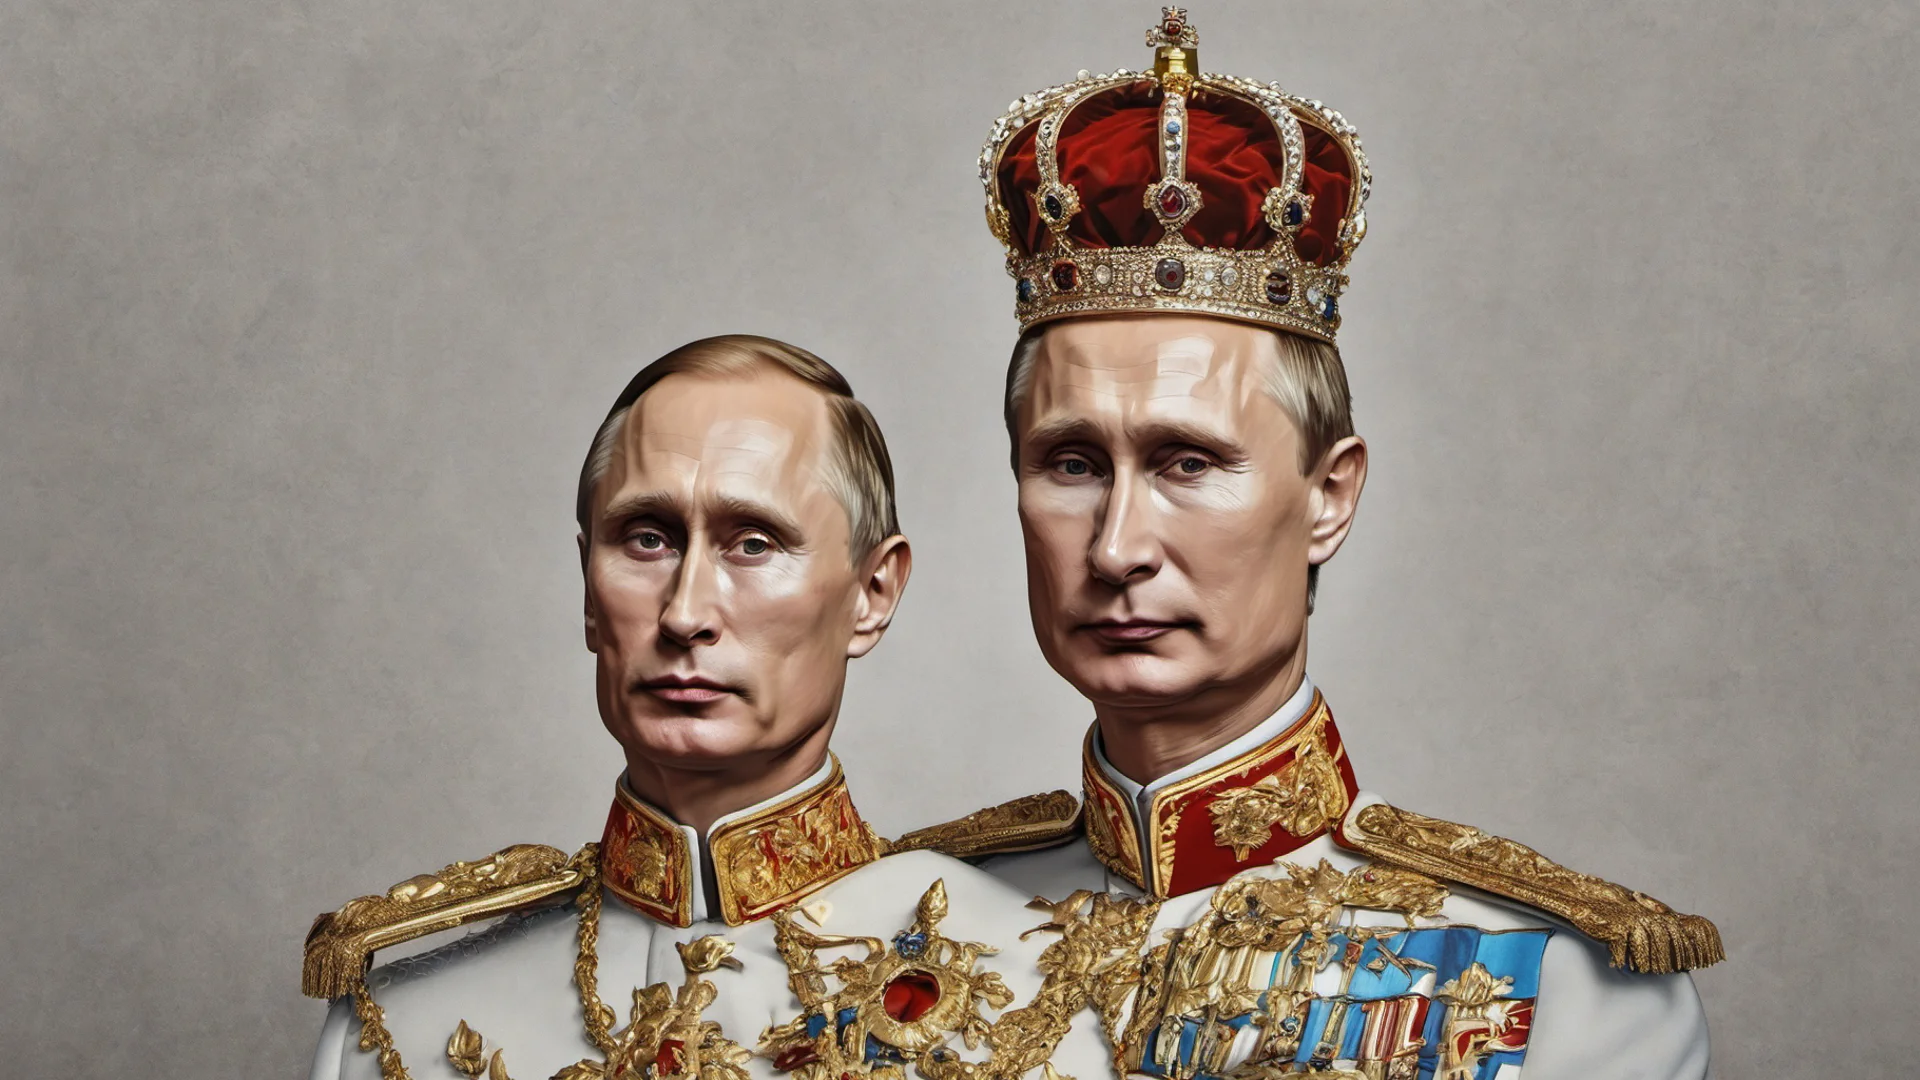 aivladmir putin king with crown amazing awesome portrait 2 wide